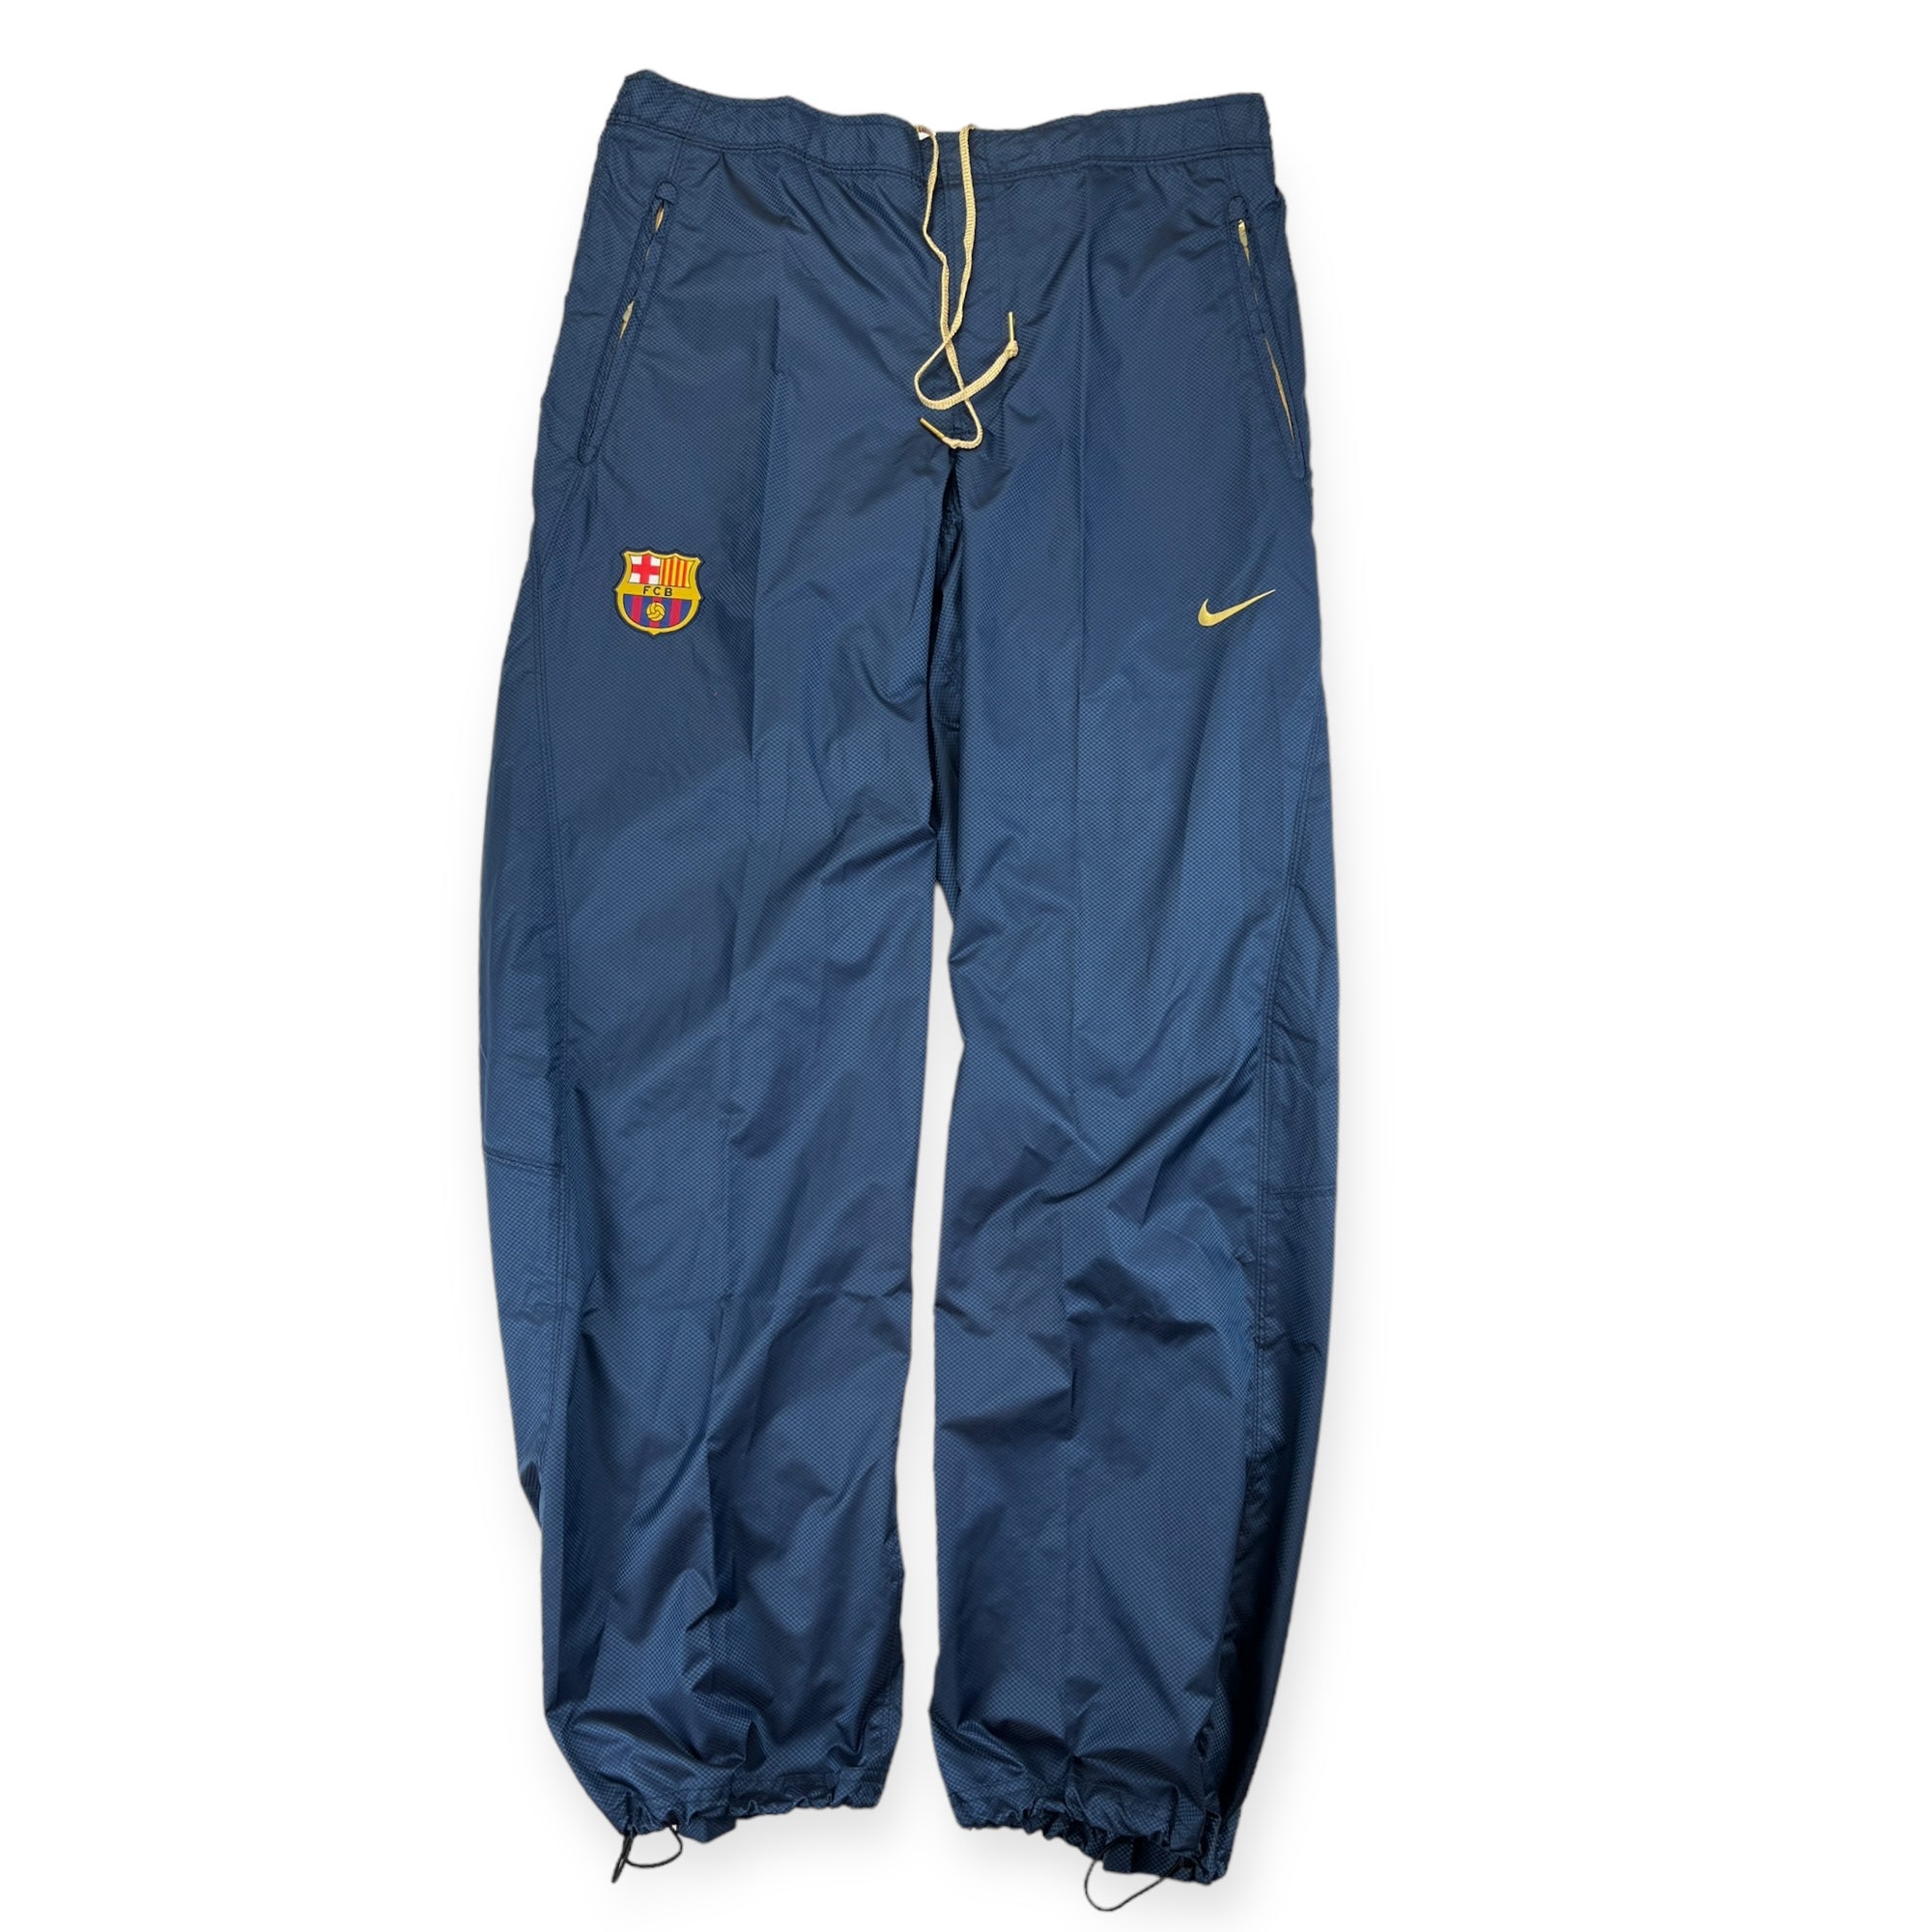 FC Barcelona Staff/Player Issue Tracksuit Bottoms